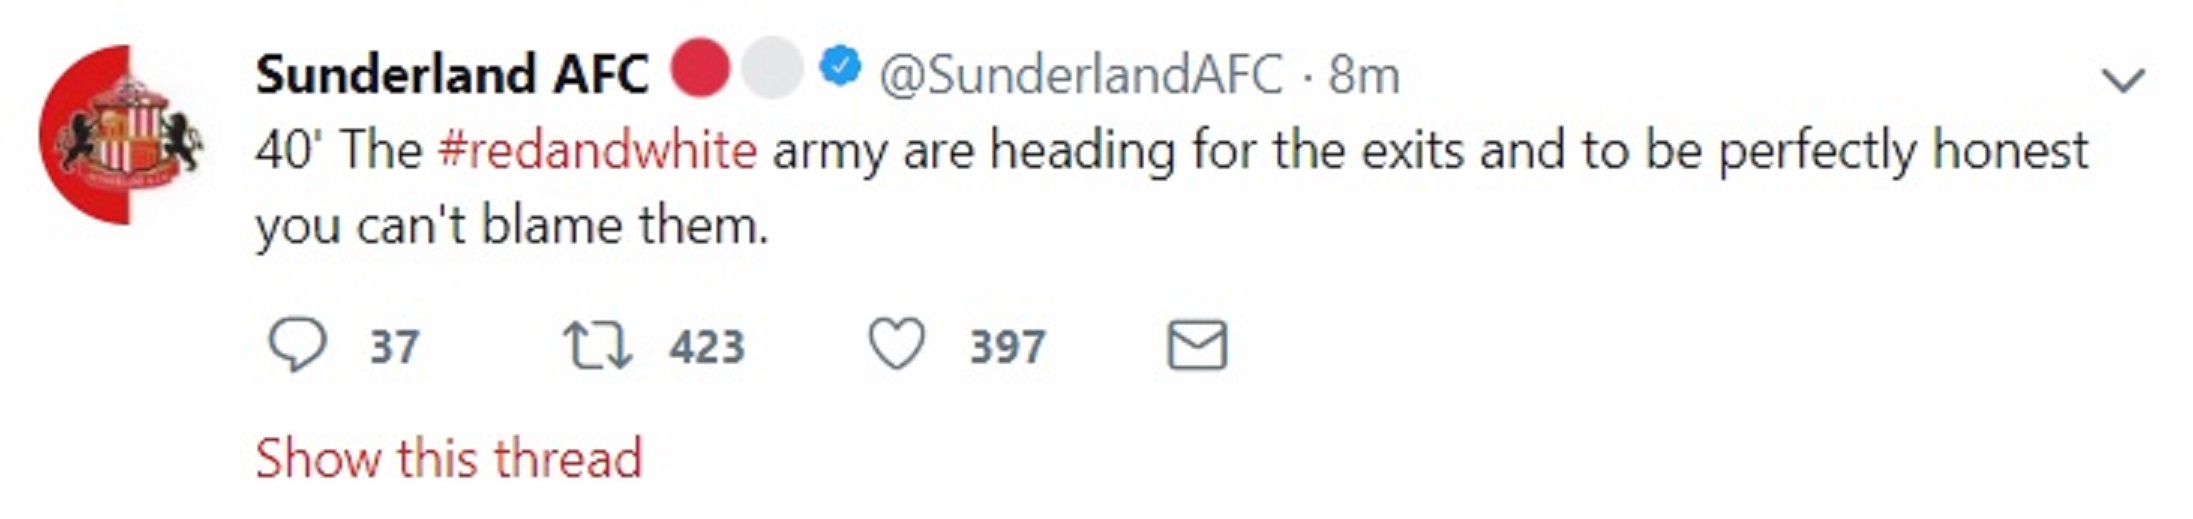 A screenshot of a deleted tweet from Sunderland's Twitter account